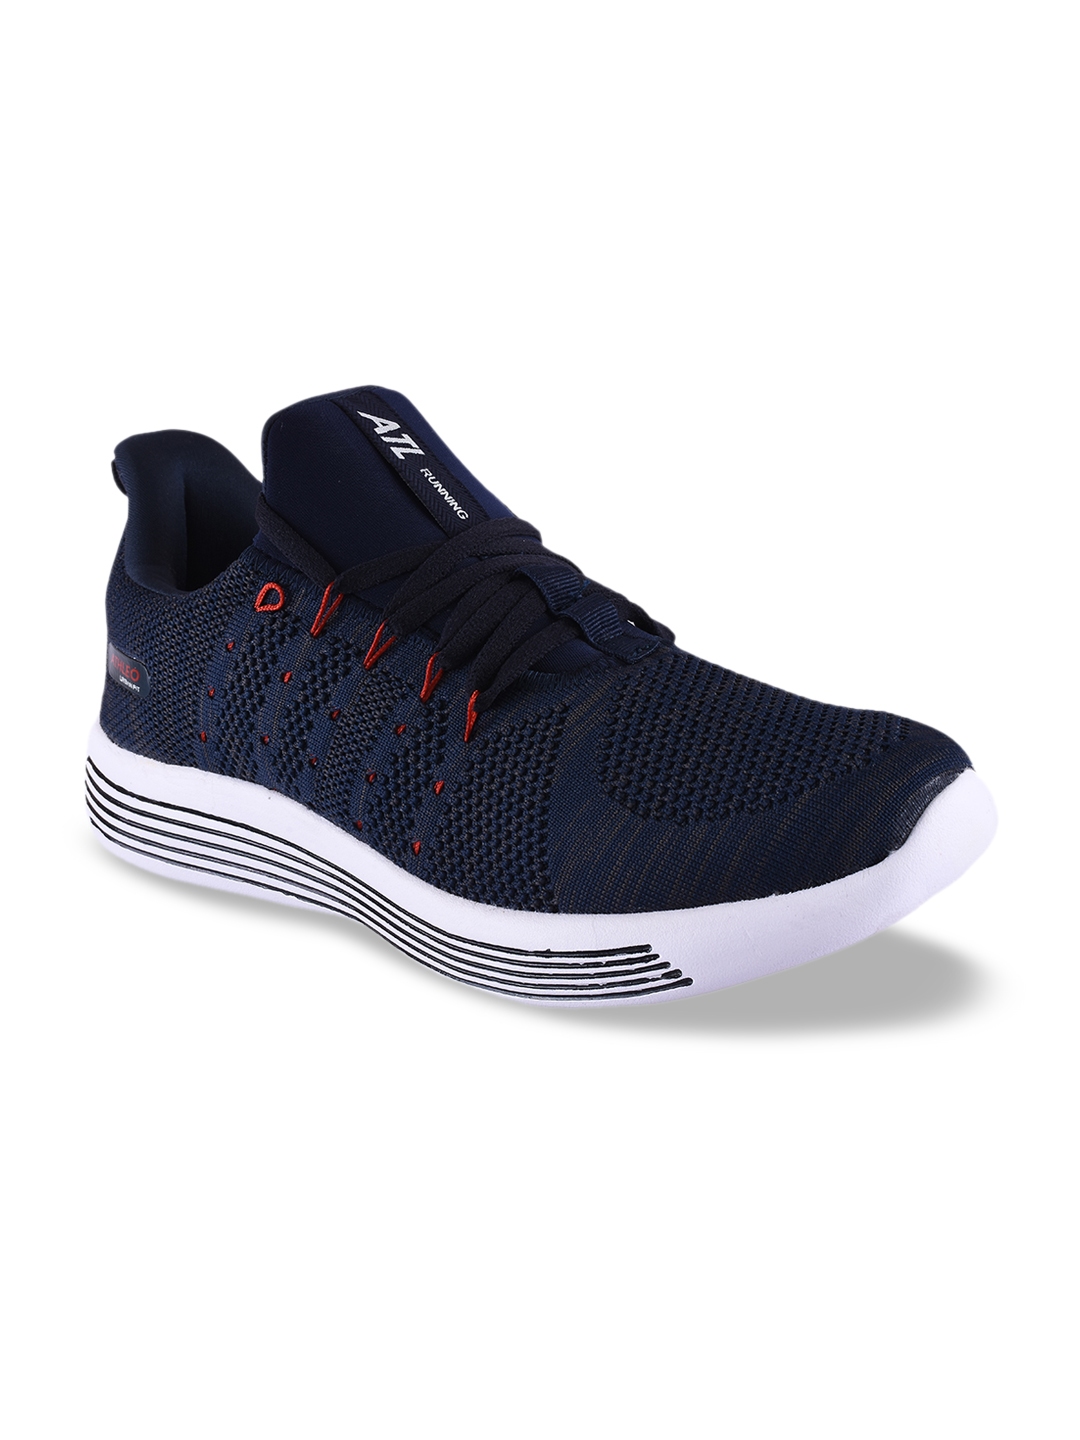 Buy Action Men Navy Blue Synthetic Running Shoes - Sports Shoes for Men ...